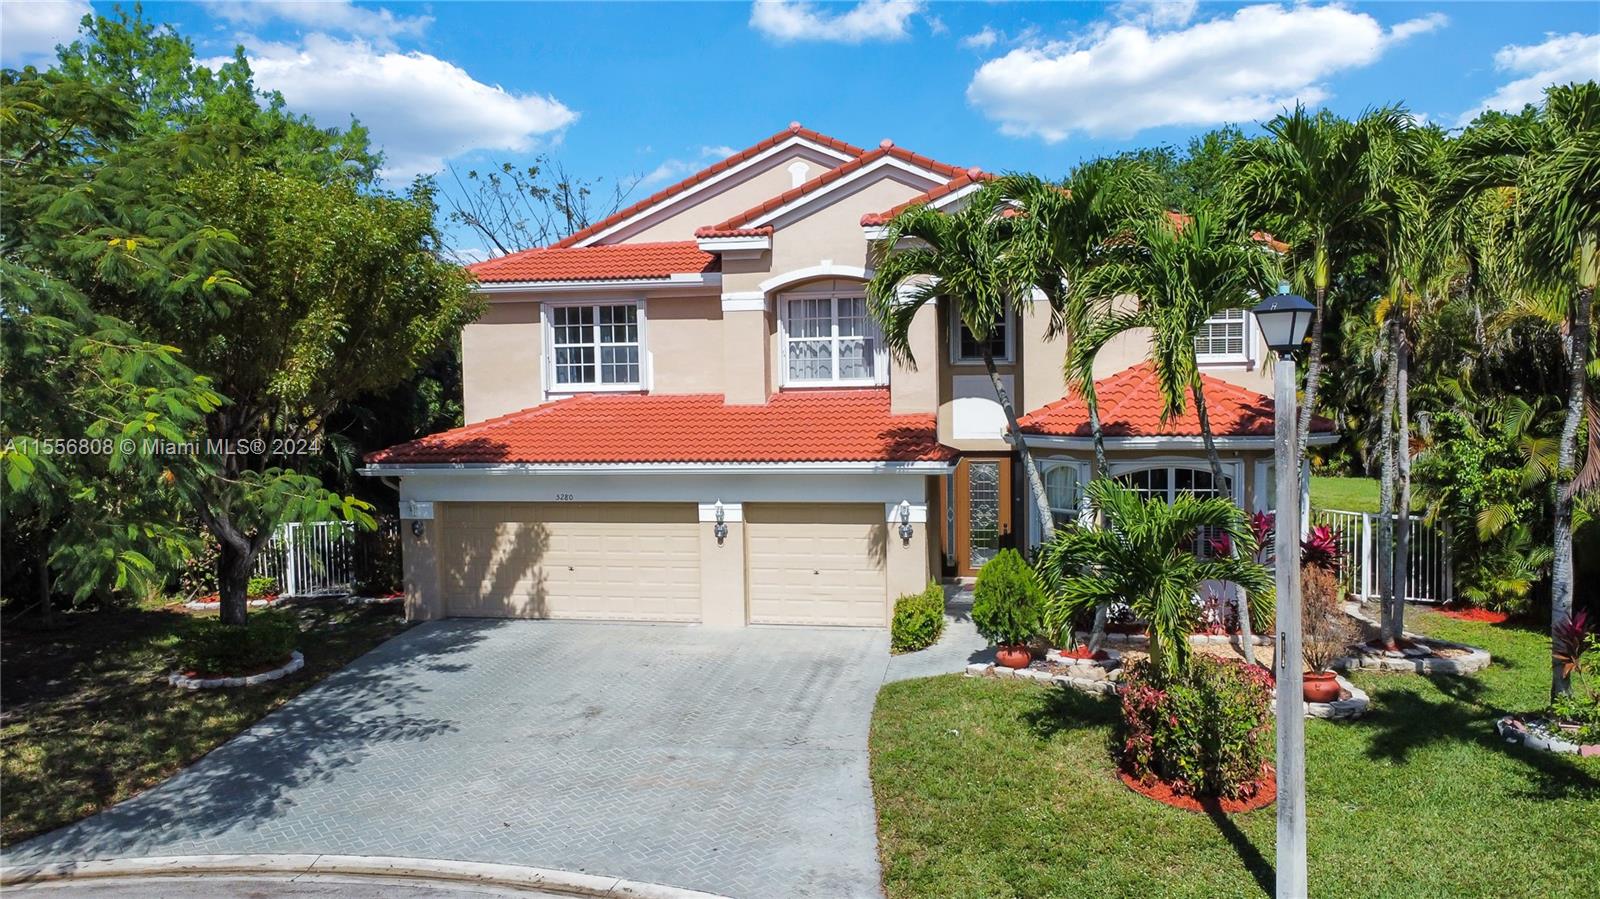 5280 Nw 95th Ave, Coral Springs, Broward County, Florida - 6 Bedrooms  
4 Bathrooms - 